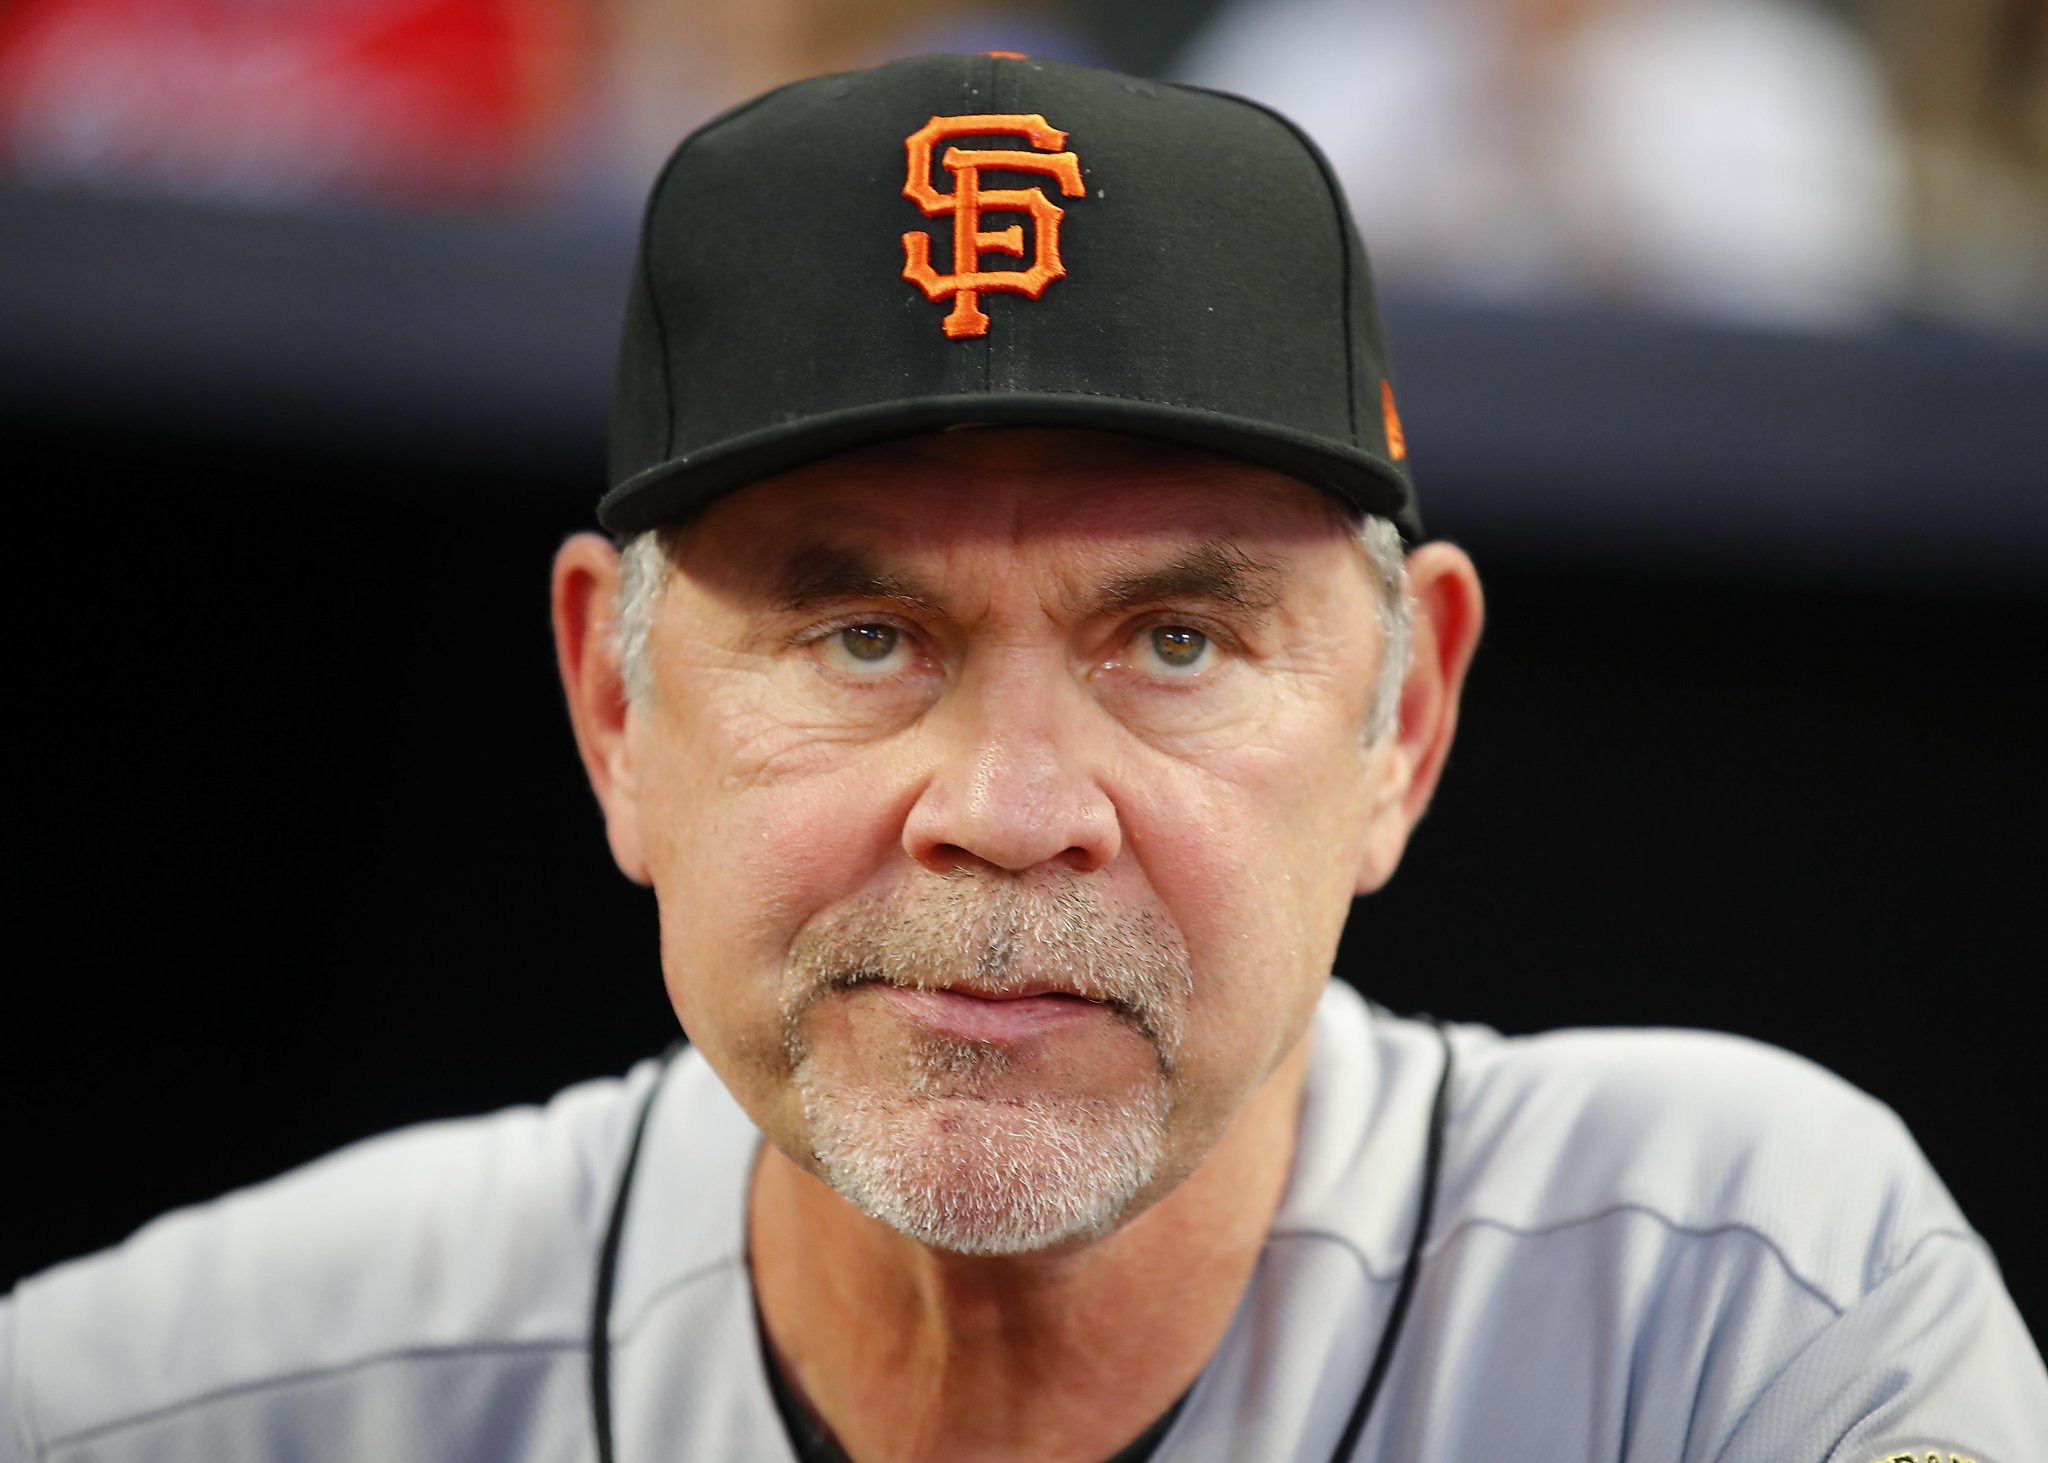 Some of our favorite Bruce Bochy anecdotes